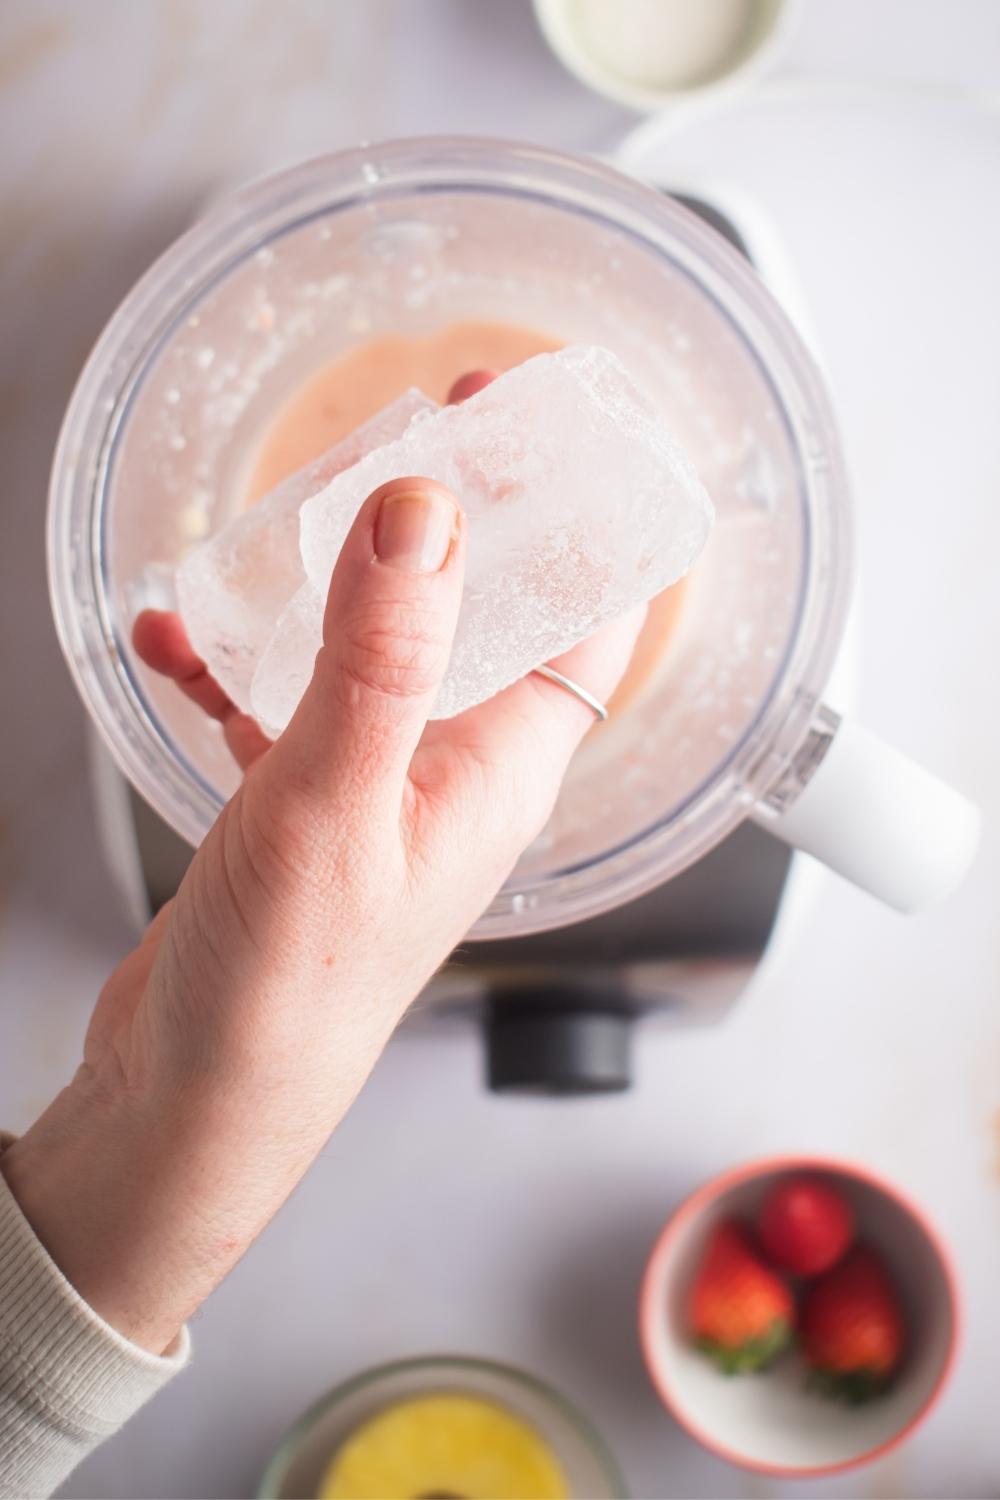 A hand holding ice cubes over a blender with Bahama mama smoothie in it.